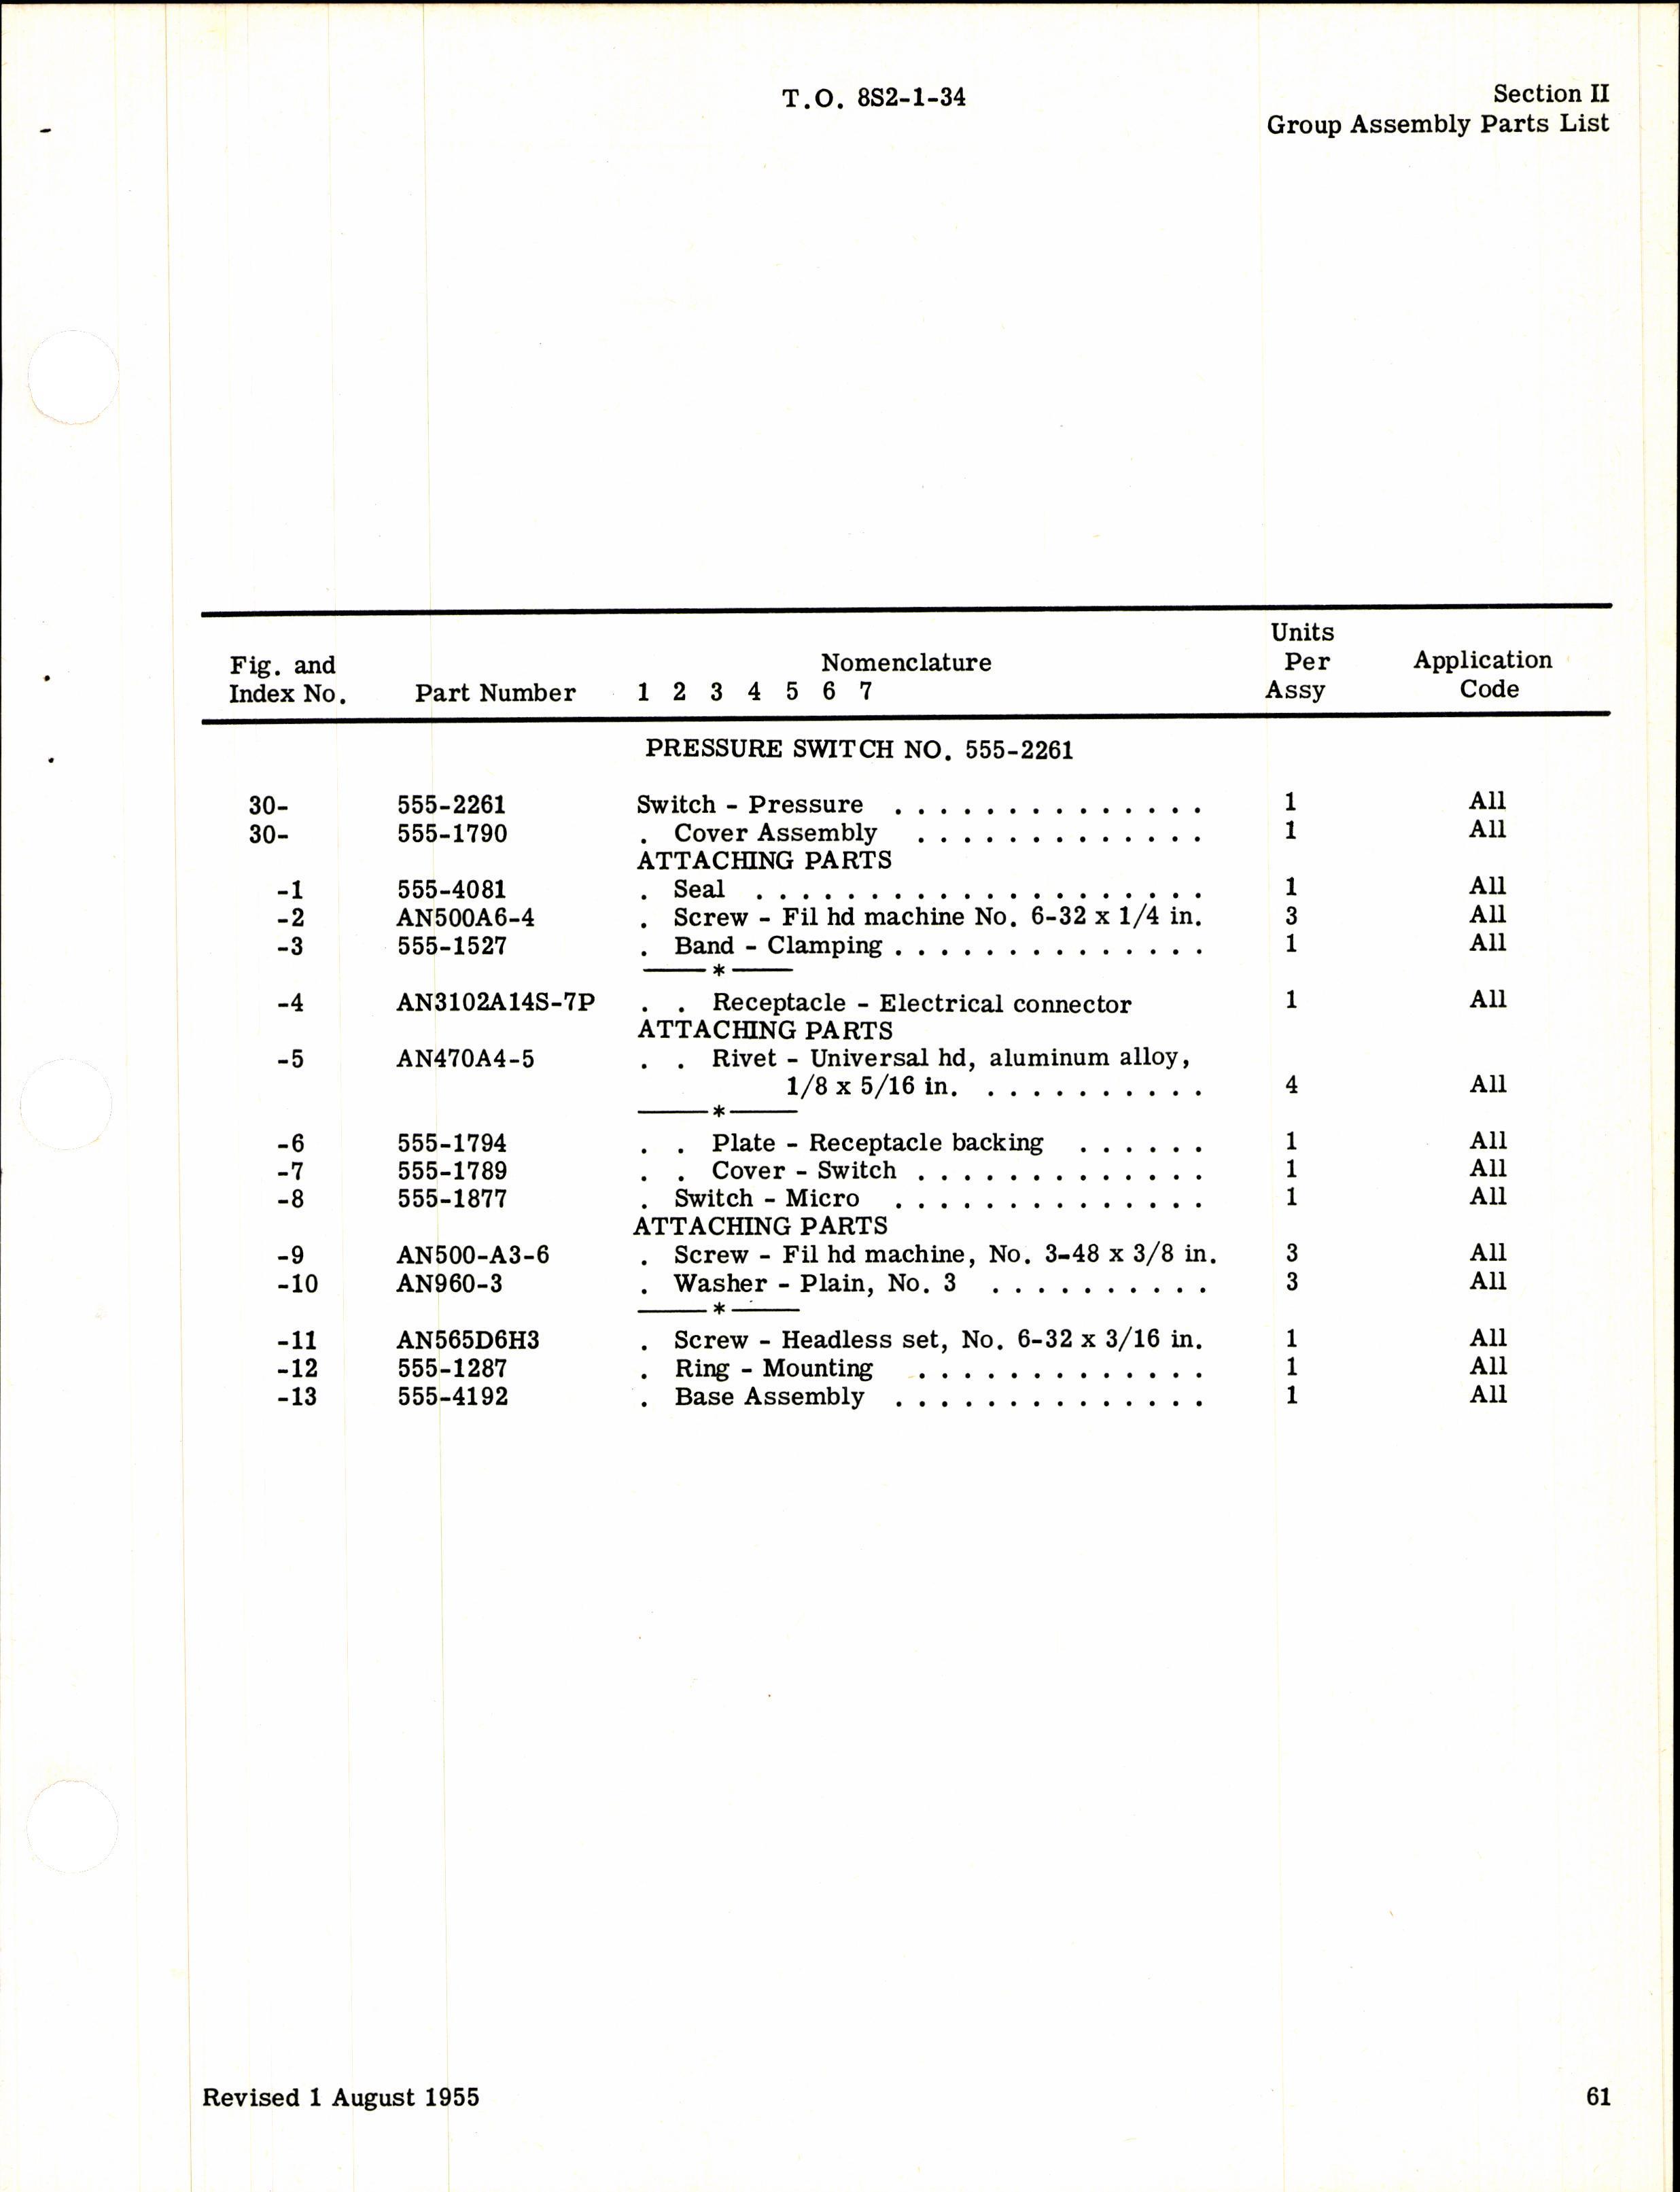 Sample page 9 from AirCorps Library document: Parts Catalog for Cook Pressure Control Switches